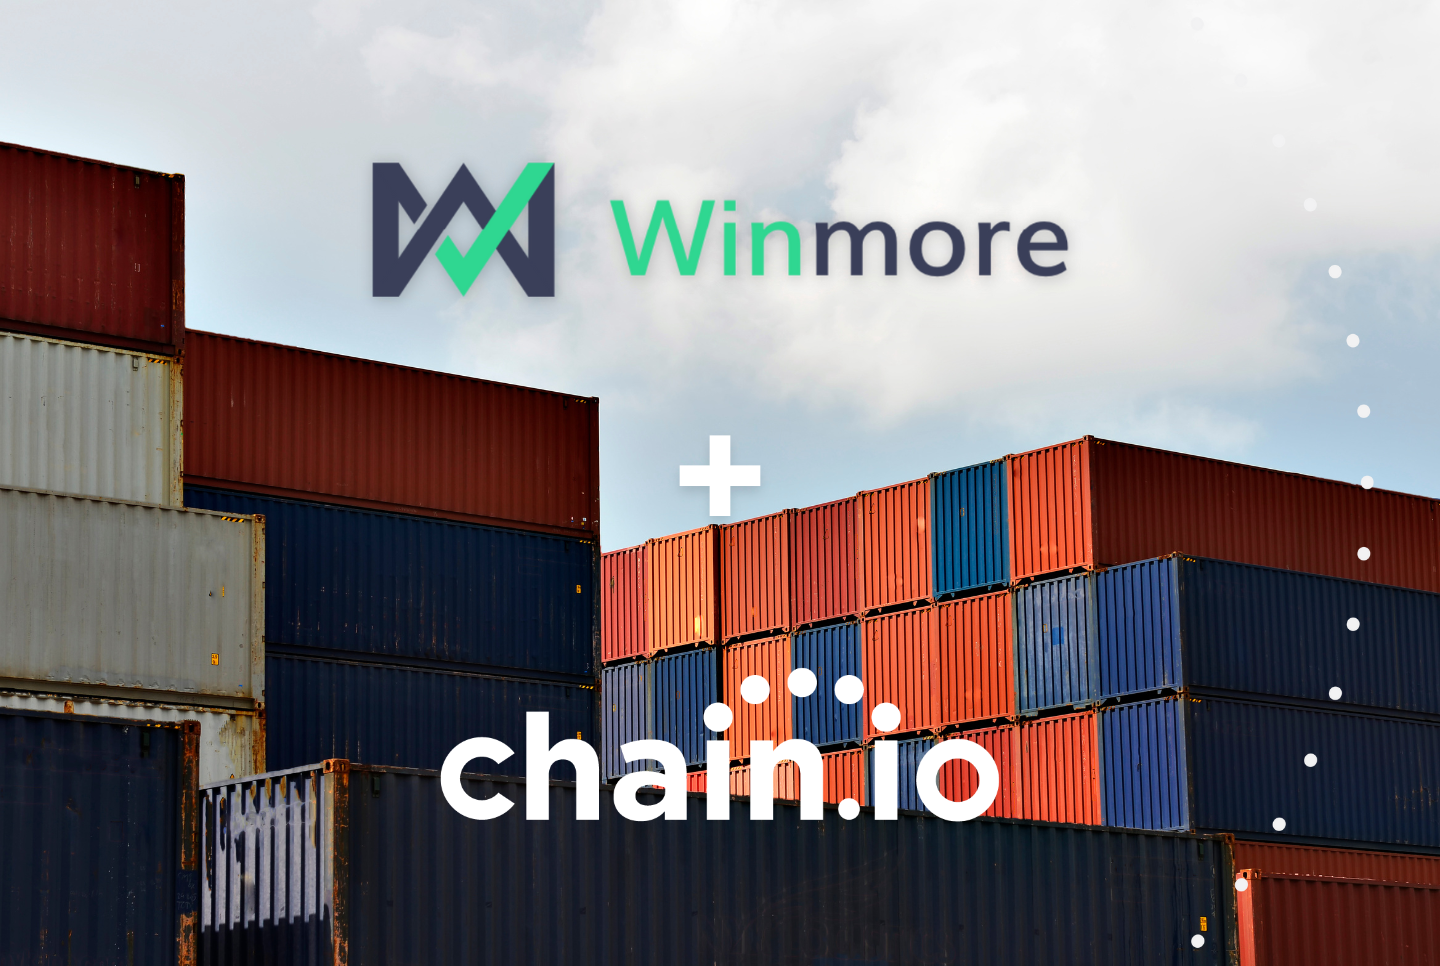 Winmore and Chain.io Announce Global Relationship to Accelerate Flexibility and Adoption of AI-based Pricing Solutions